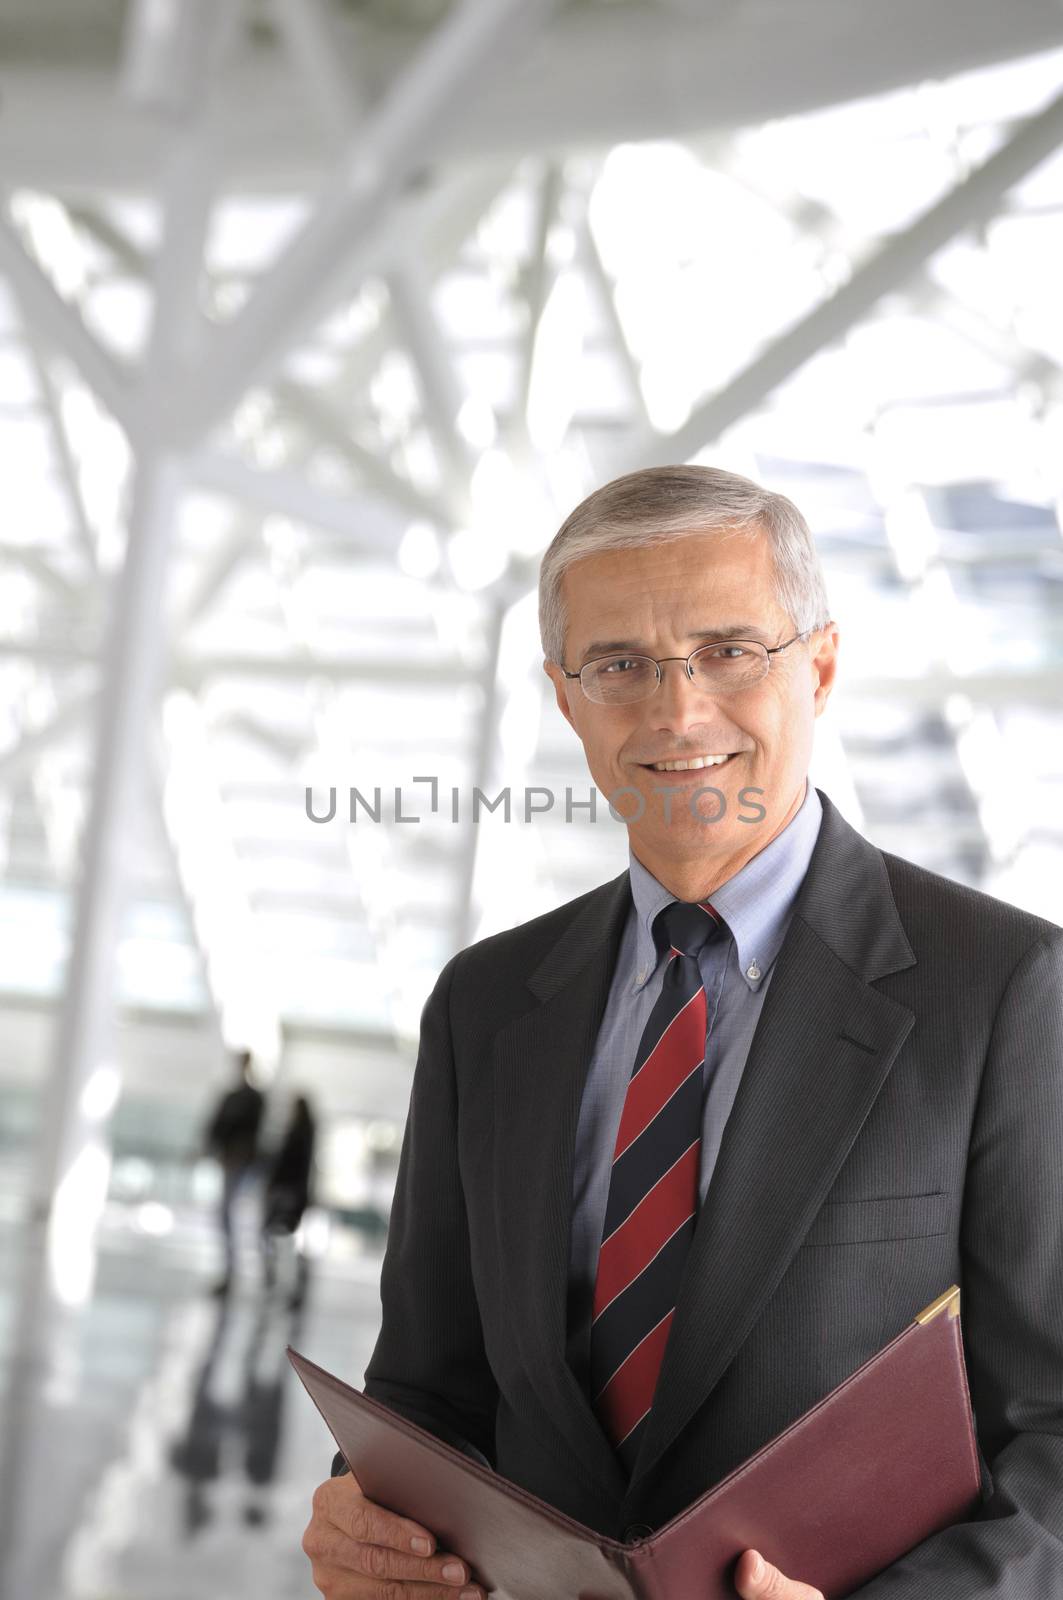 Closeup of a mature businessman inside a modern office building. The man is holding a leather portfolio and smiling at the camera. Blurred people are in the background.